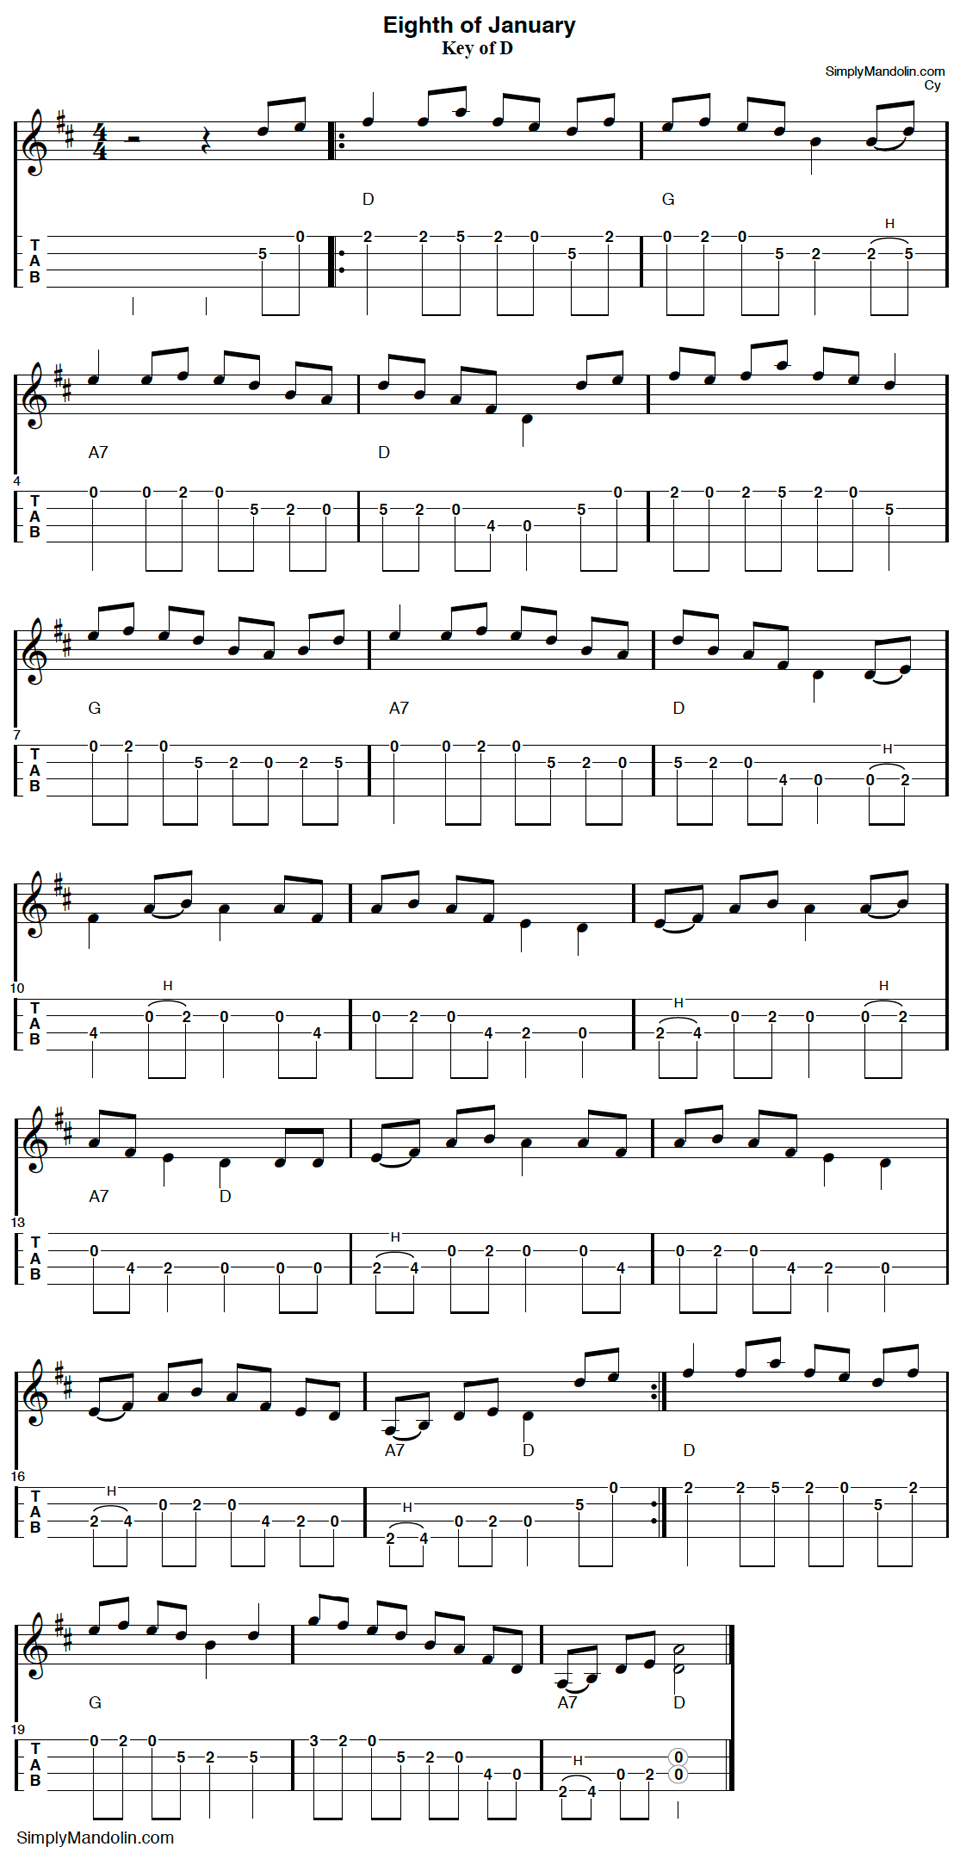 Mandolin tab for the tune "eighth of january".